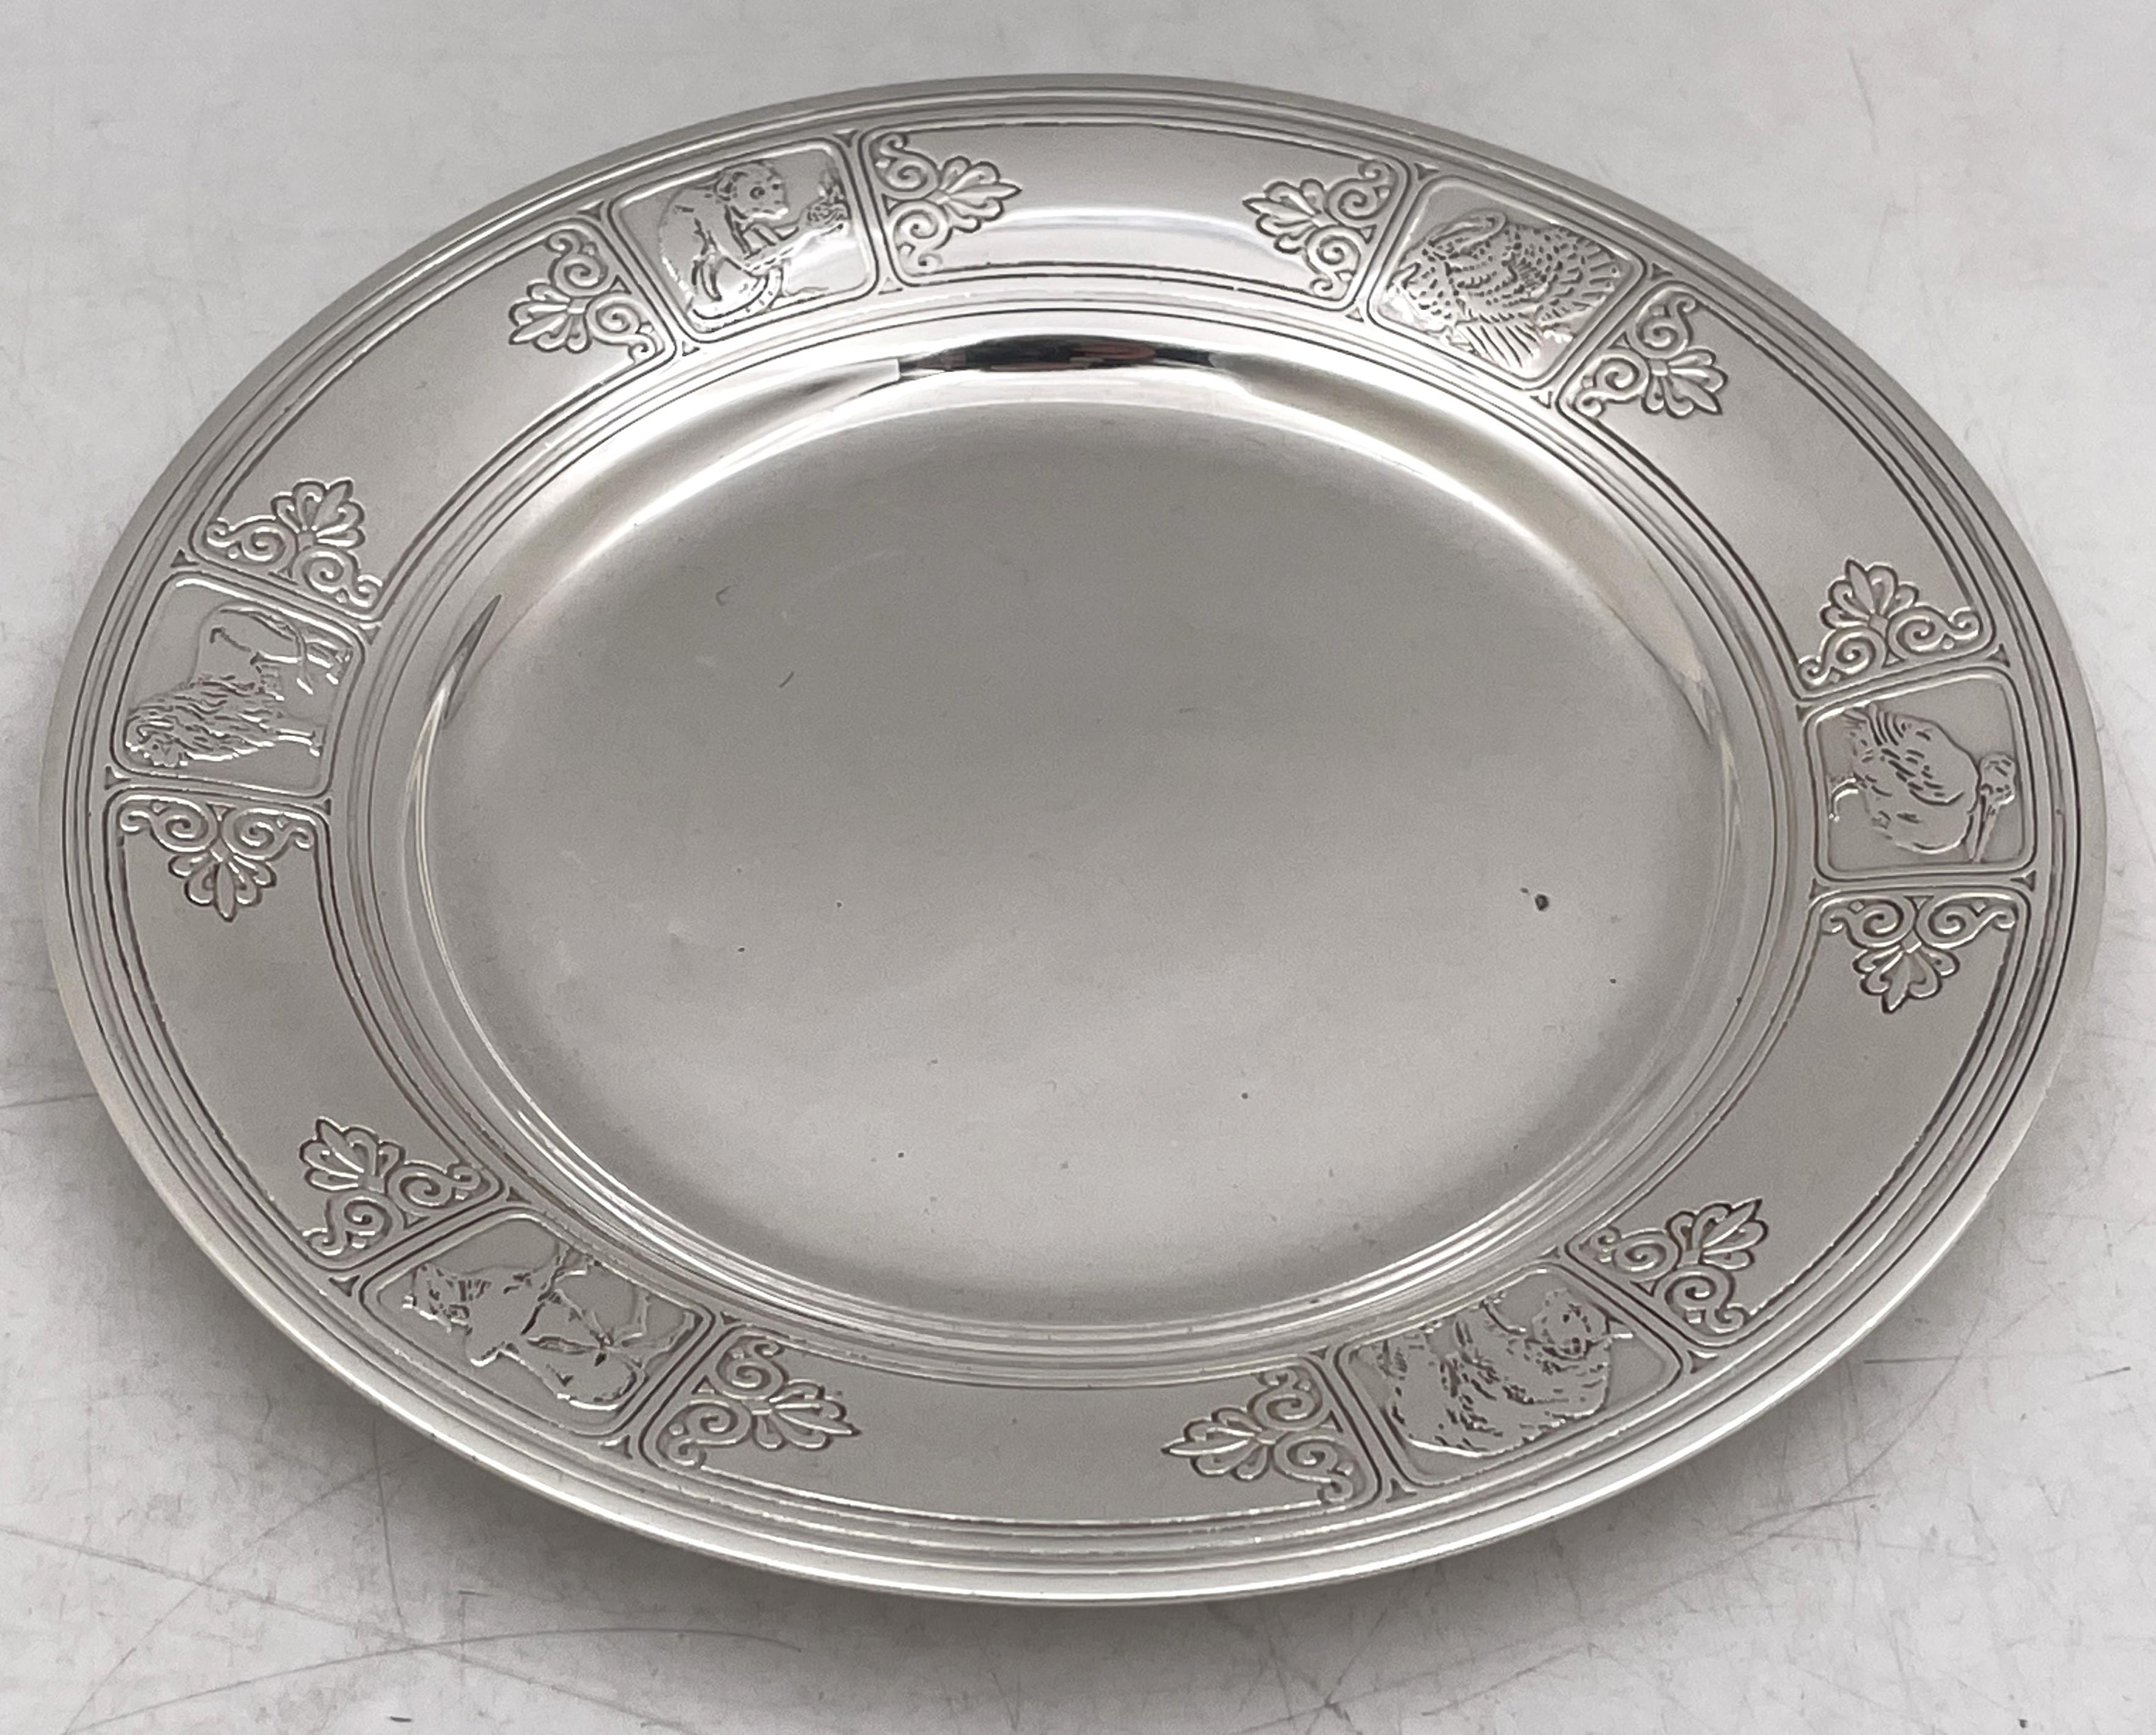 Tiffany & Co. sterling silver child's plate in pattern number 20960A from 1927, adorned with etched animal motifs. It measures 7 1/4'' in diameter by 2/3'' in height, weighs 8.7 troy ounces, and bears hallmarks as shown. 

The legendary Tiffany